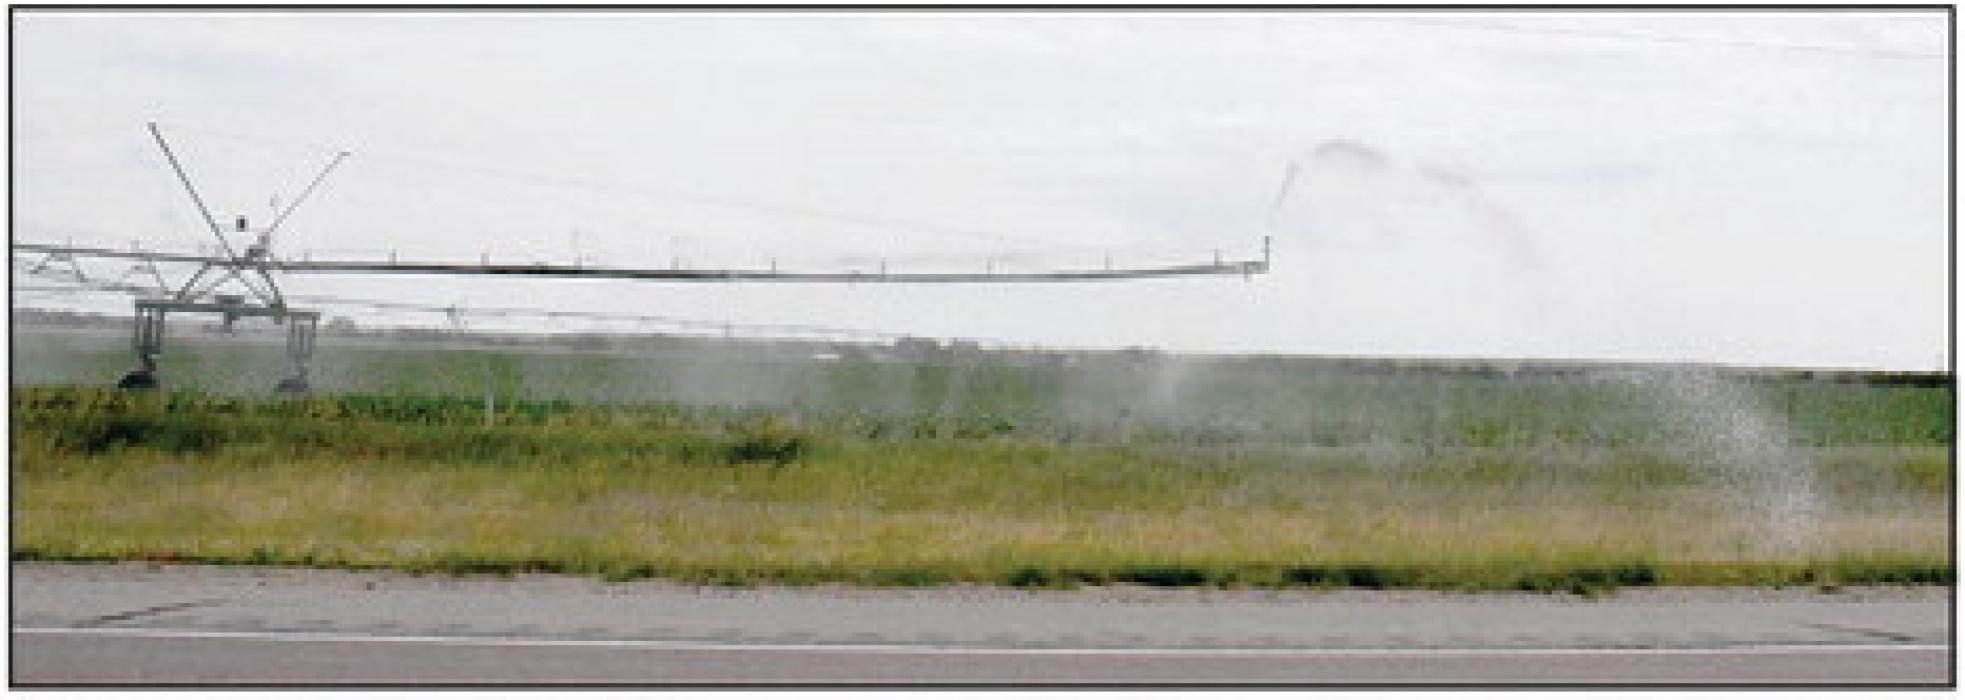 Remember this summer as temperatures rise and corn continues to grow that according to Nebraska Statute §39-301, it is illegal to water a public road with center pivot irrigation systems. If irrigation systems run the risk of watering roadways, they are required to use devices that automatically shut off the end gun according to Neb. Rev. Stat. §39-302. Damage done to public roadways or driving hazards caused by the pivots can result in liability and fines.